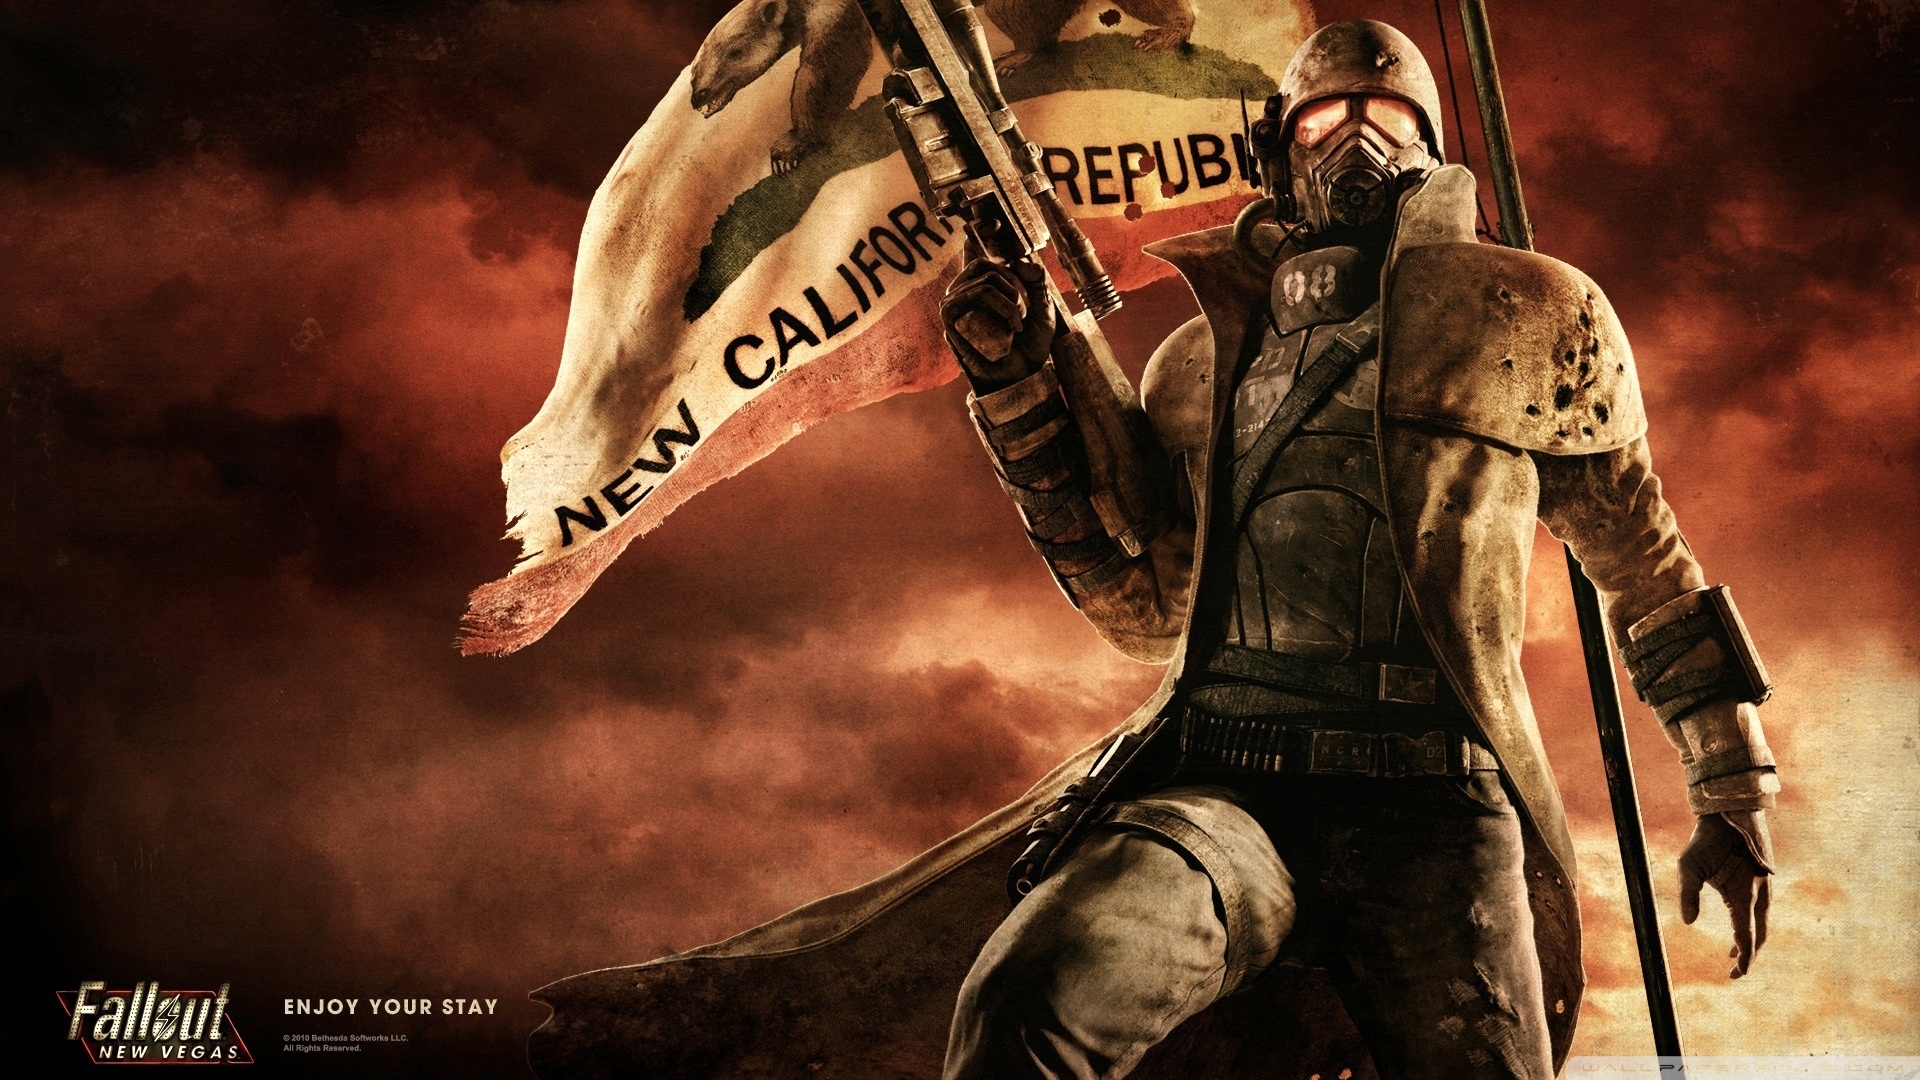 10 Top Fallout New Vegas Backgrounds FULL HD 1920×1080 For PC Desktop